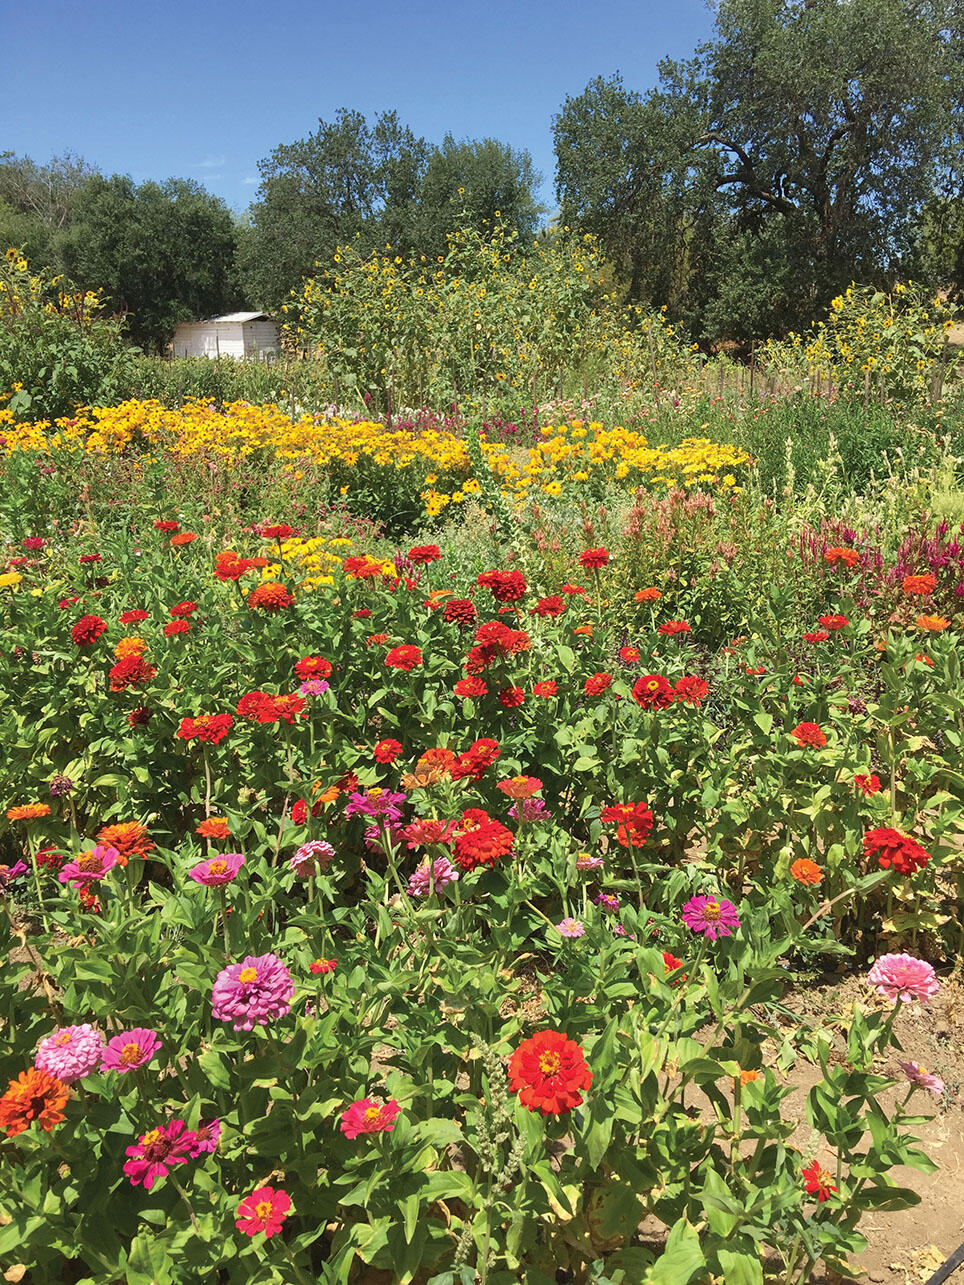 A colorful and diverse habitat garden provides an excellent environment for pollinating species. (Photo by Gordon Frankie.)